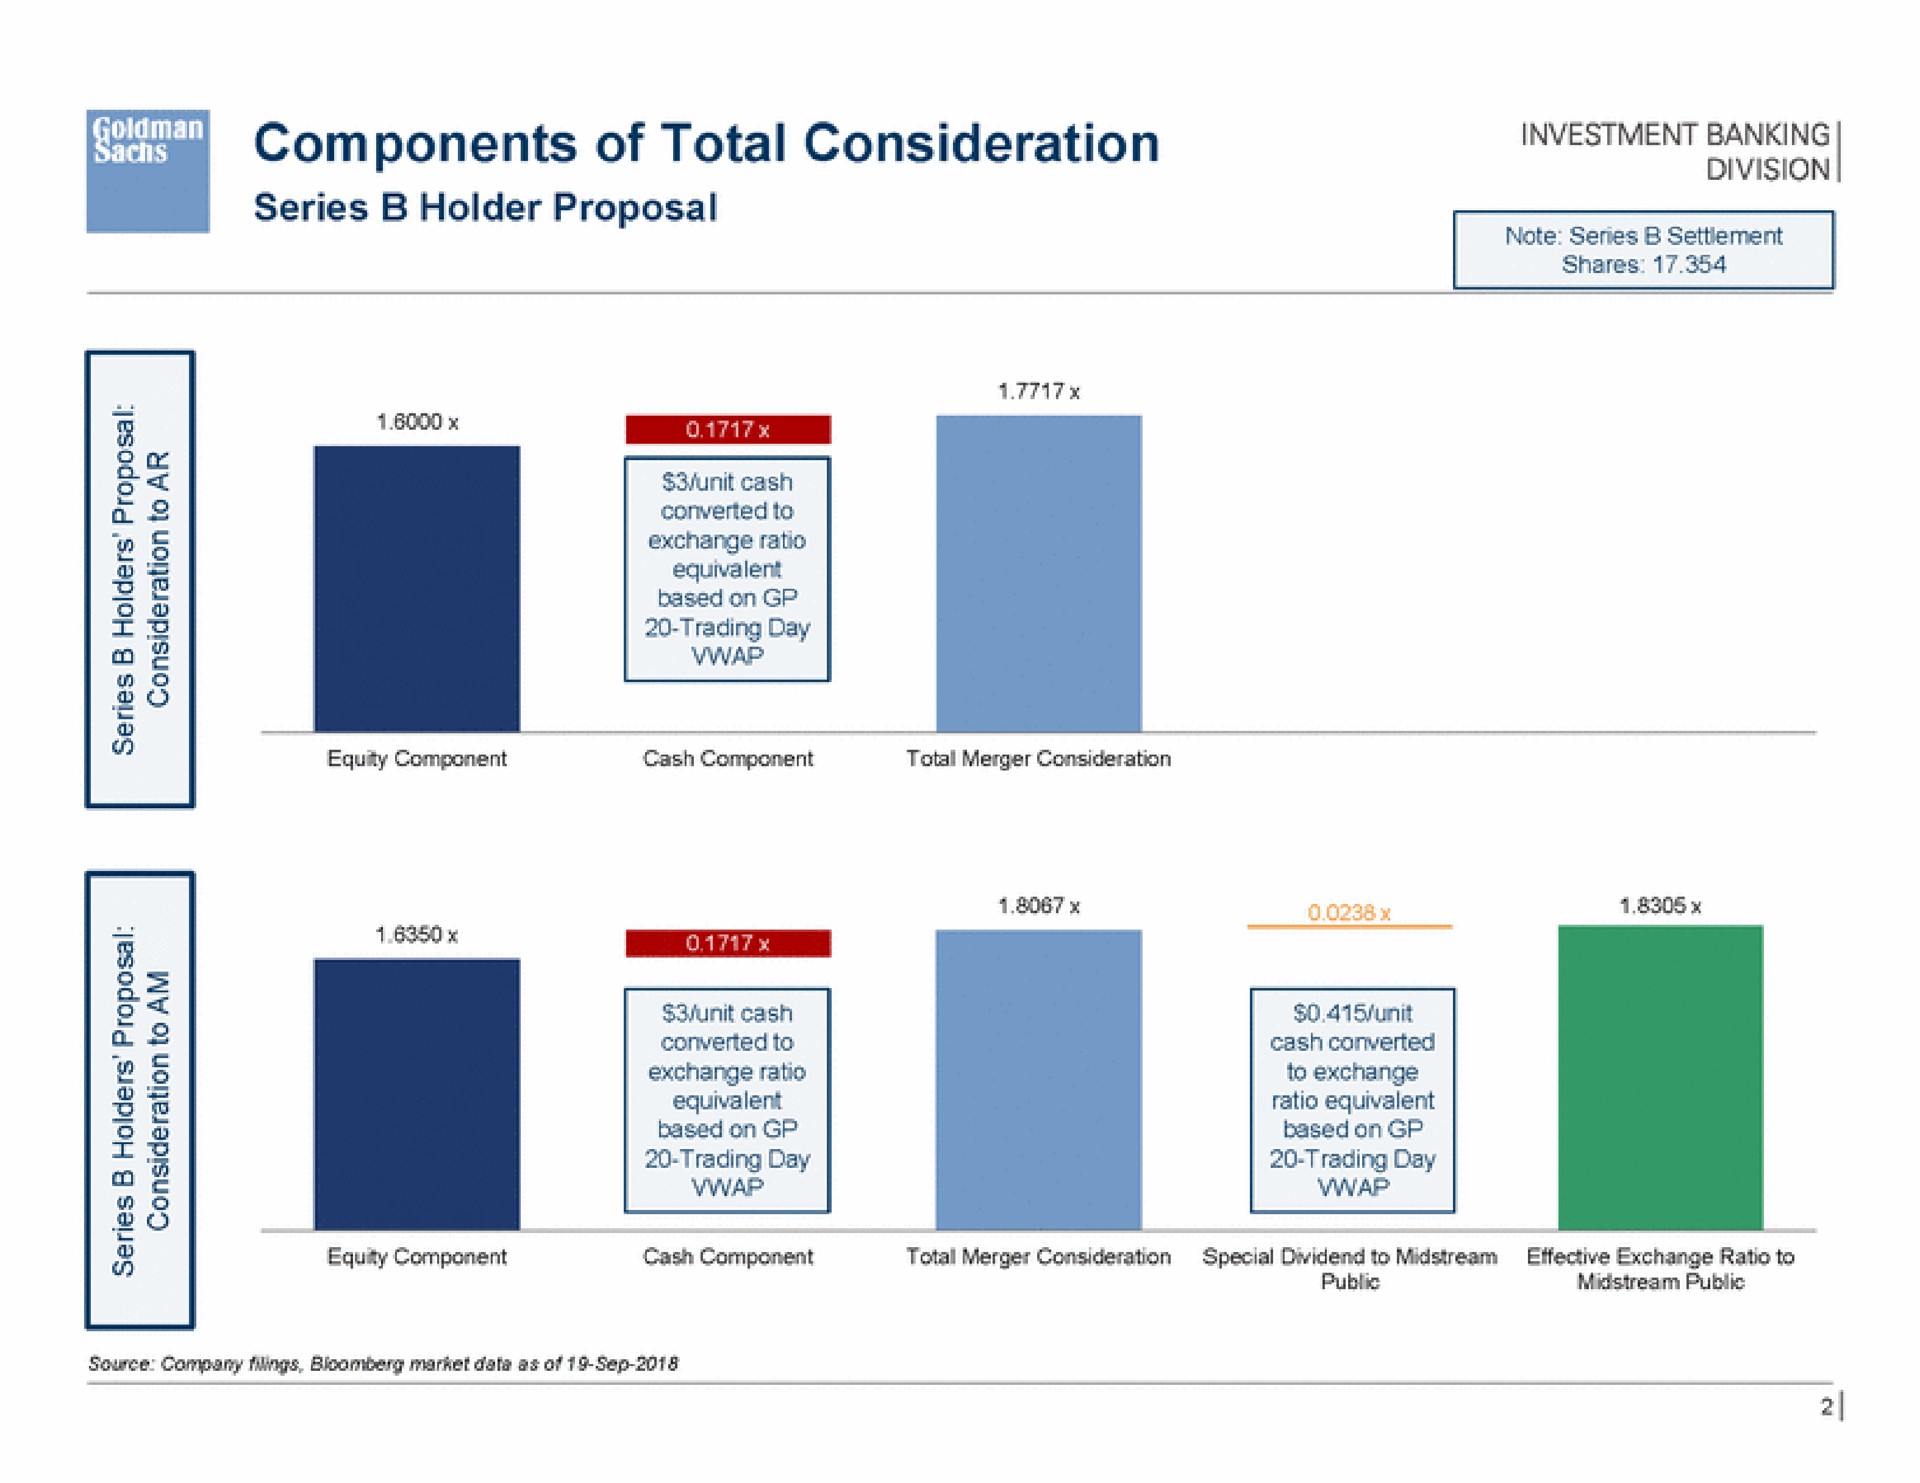 components of total consideration | Goldman Sachs